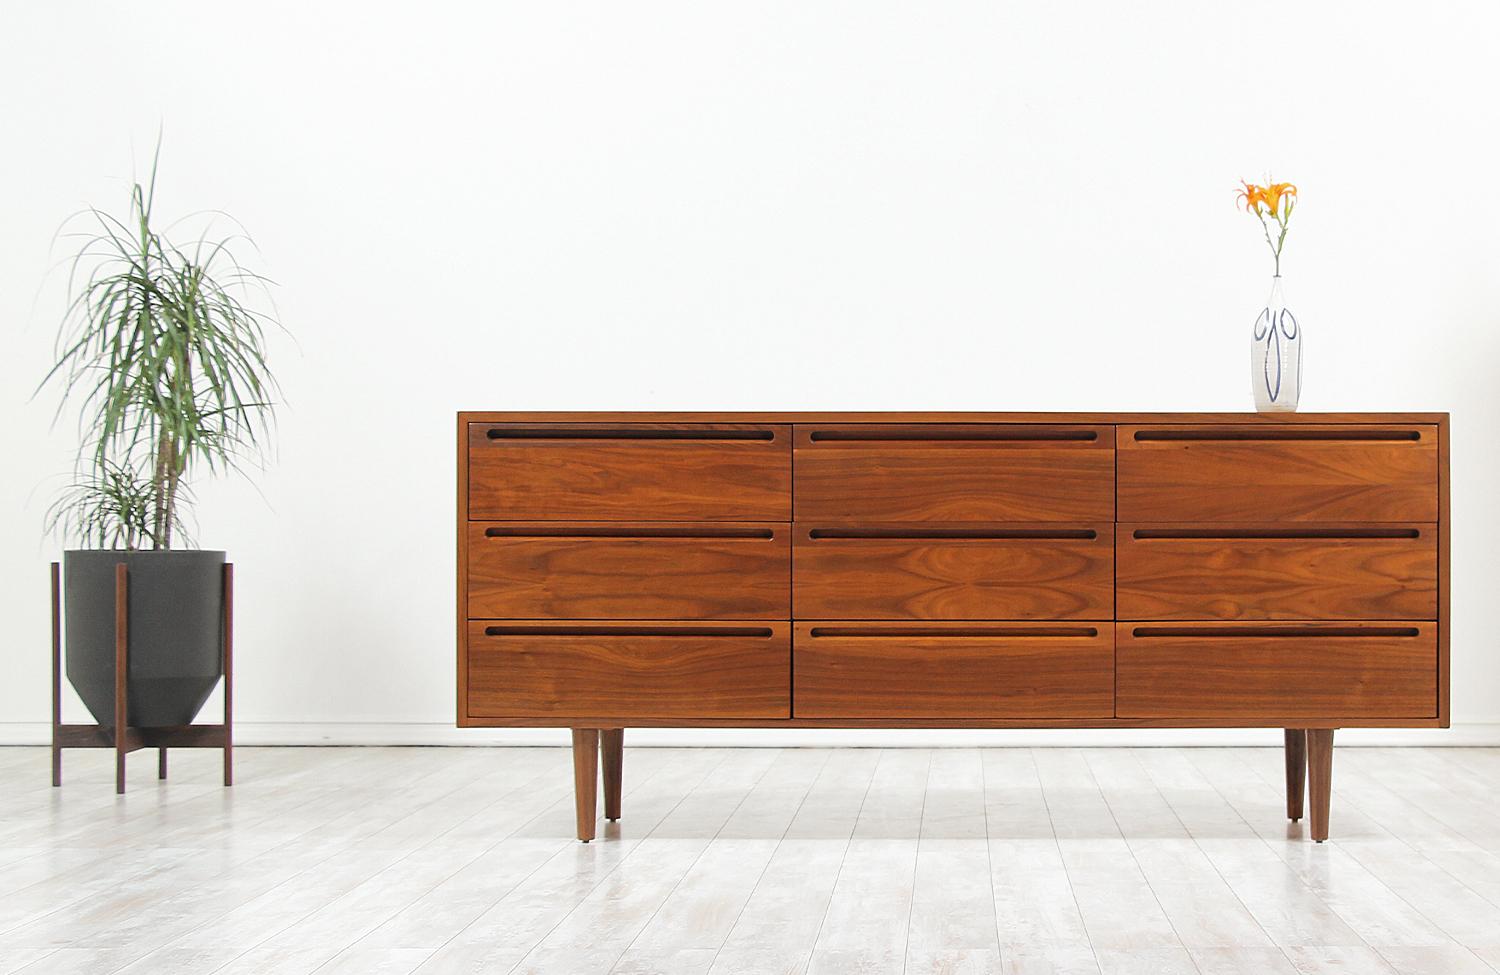 Beautiful Mid-Century Modern long dresser designed and manufactured by American of Martinsville in the United States, circa 1960s. This nine drawer dresser features a walnut wood frame with sculpted handles and a beautiful warm grain detail that